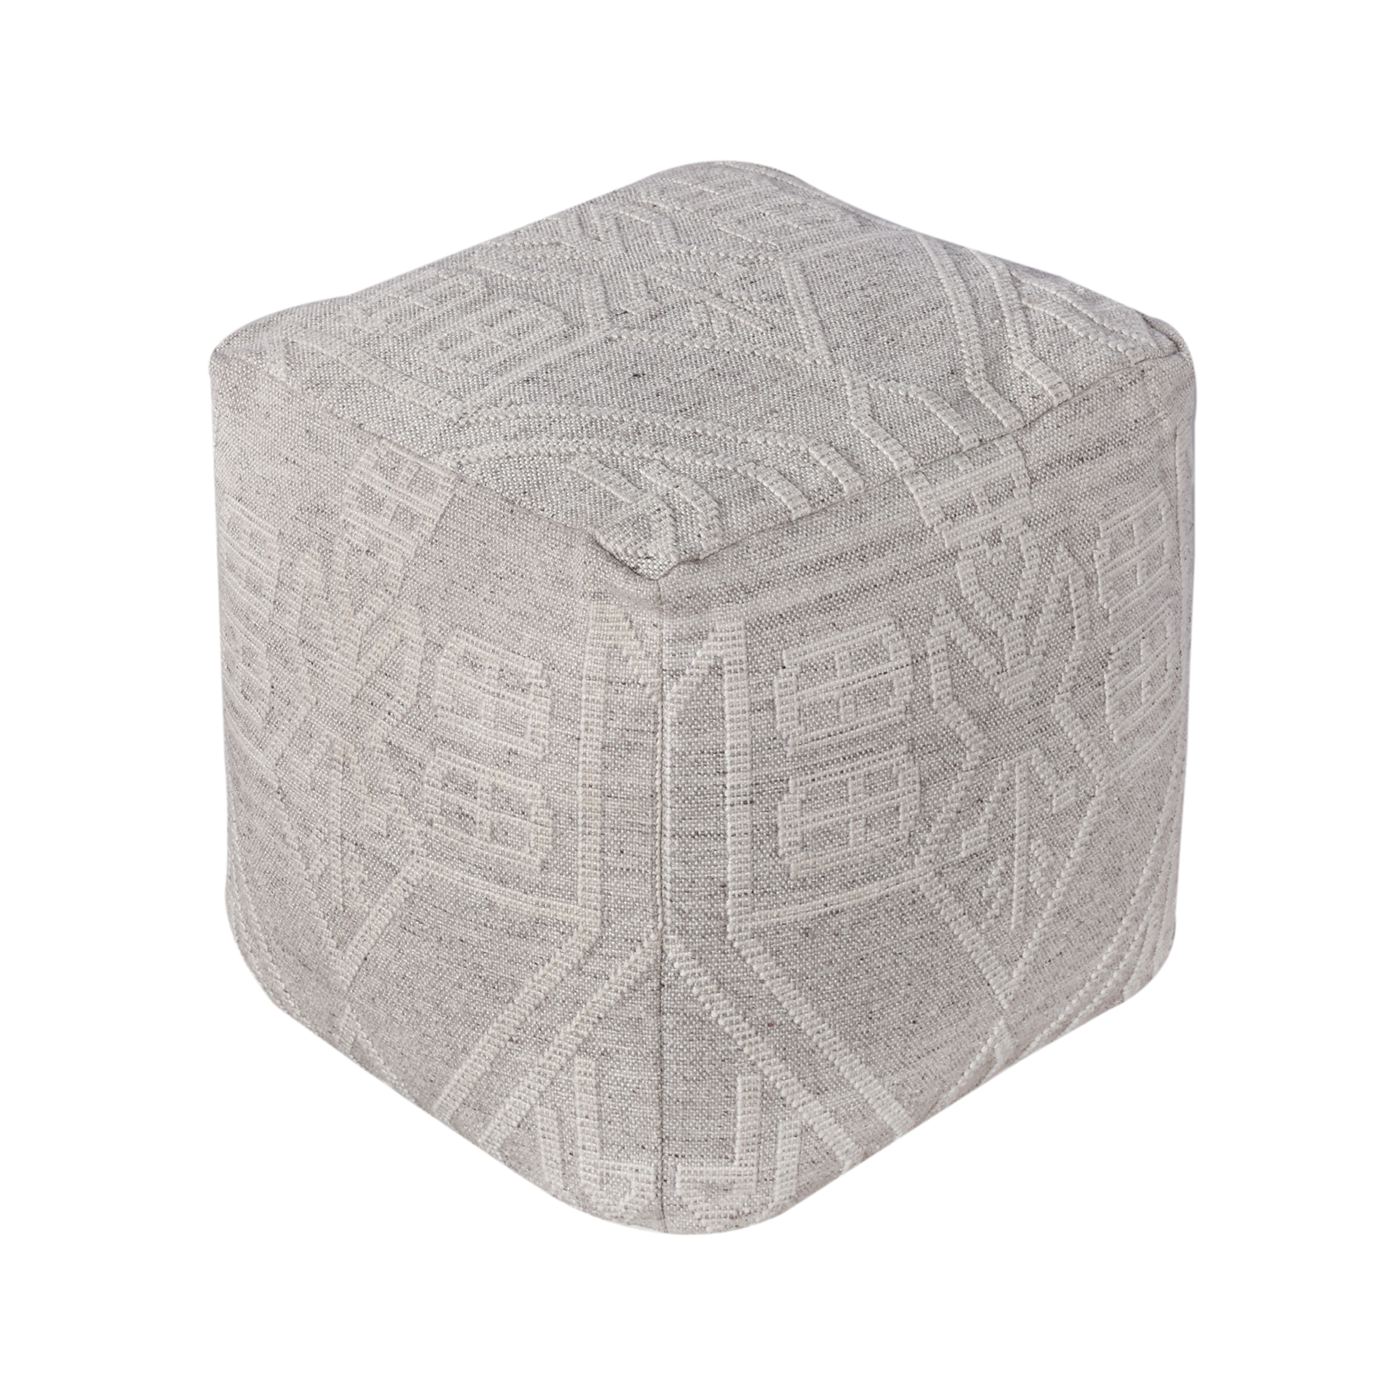 Derio - II Pouf, Pet, Taupe, Natural White, Pitloom, Flat Weave